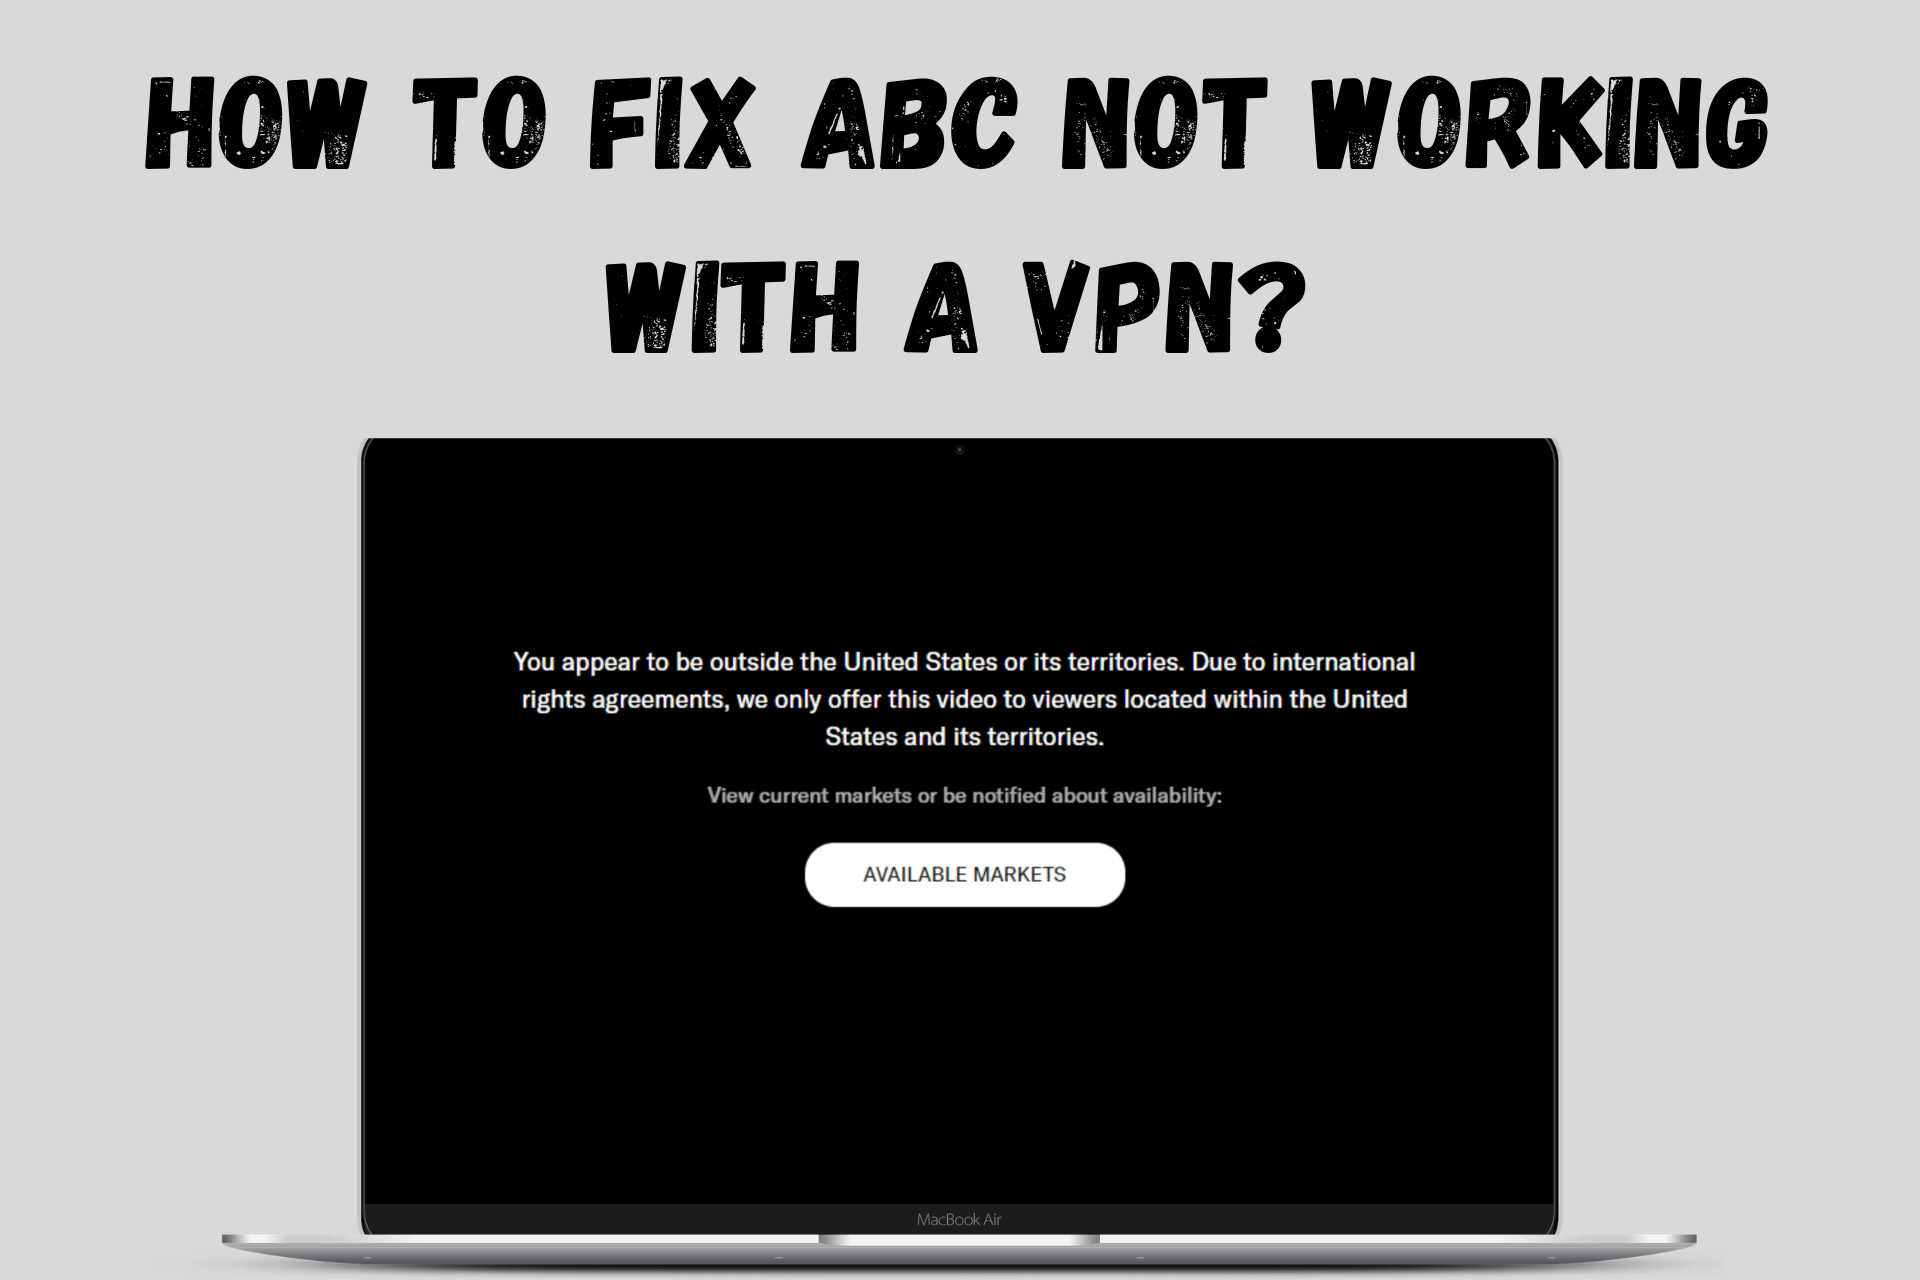 ABC not working with VPN